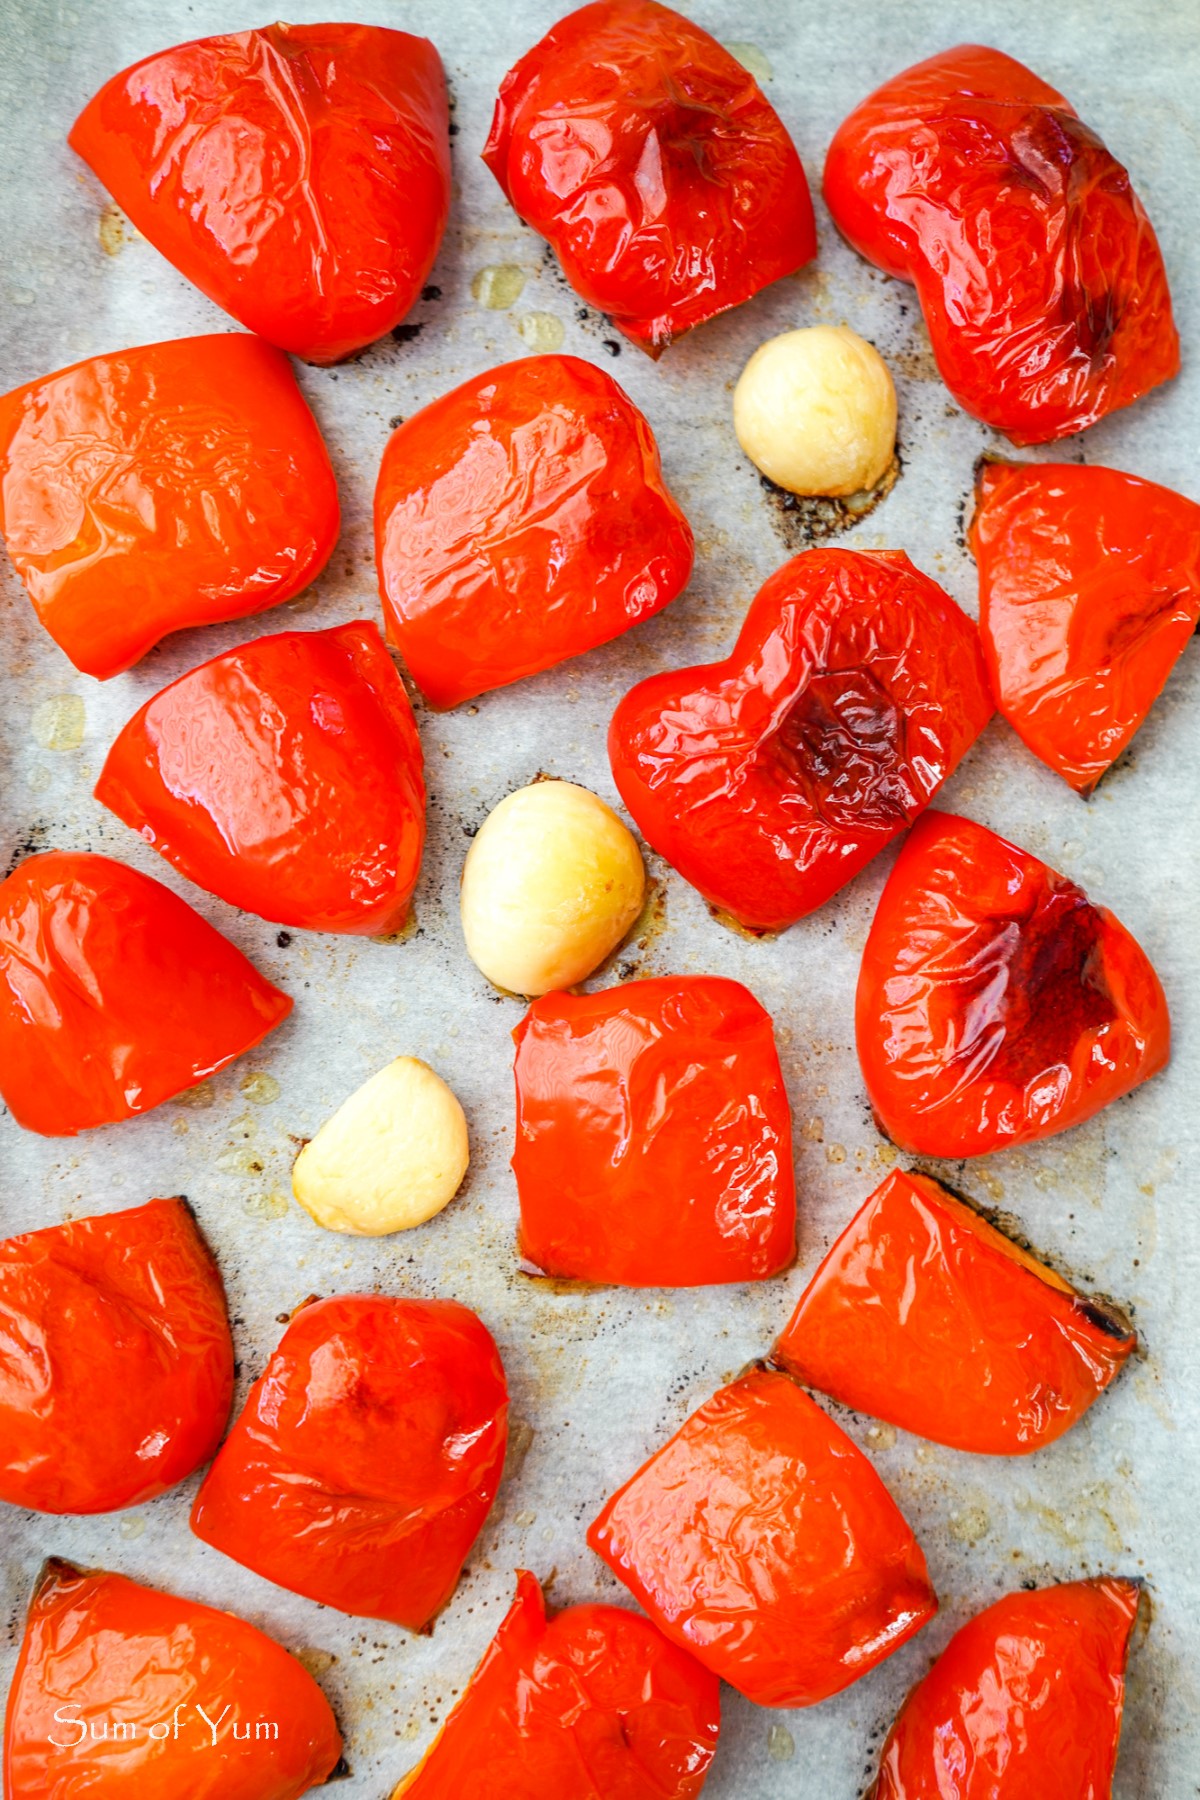 Roasted Red Peppers and Garlic 